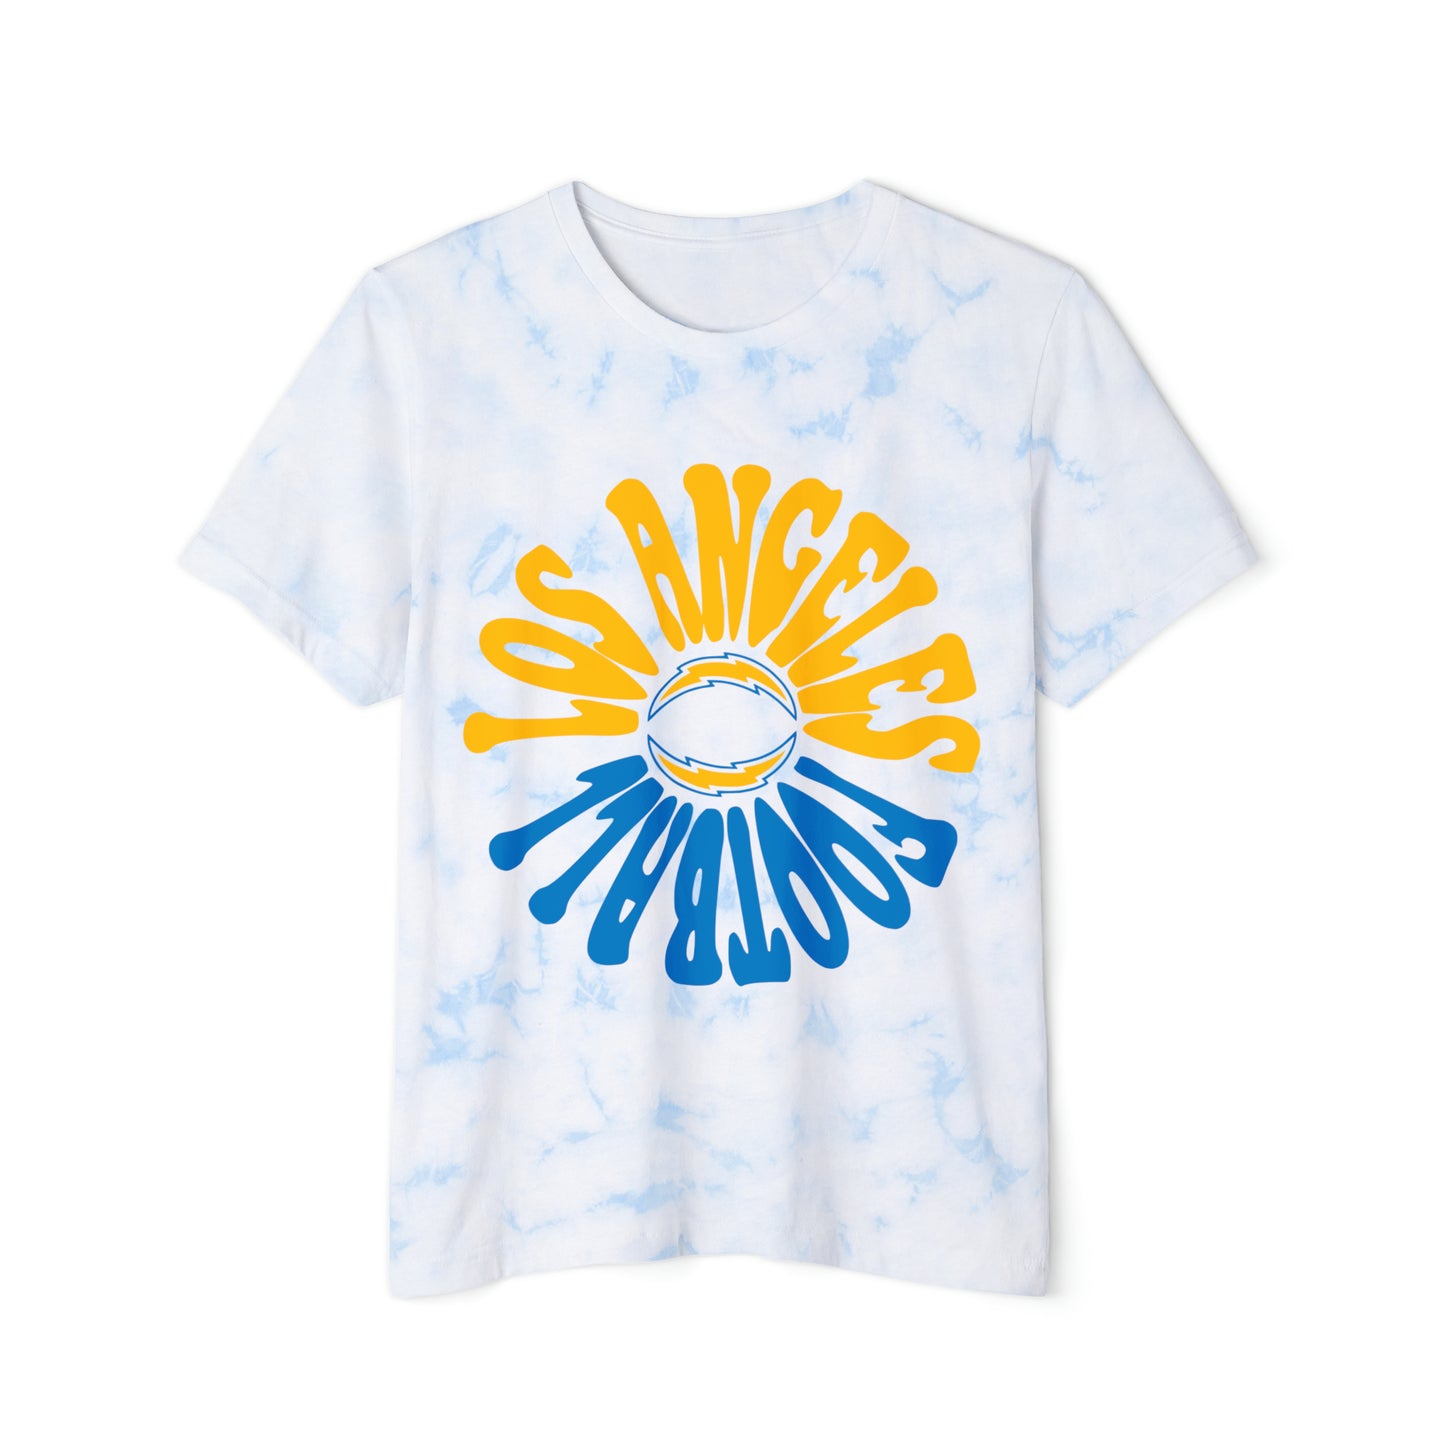 Tie Dye Retro Los Angeles Chargers T-Shirt - Vintage Football L.A. Short Sleeve Tee Oversized Style Apparel - Design 2